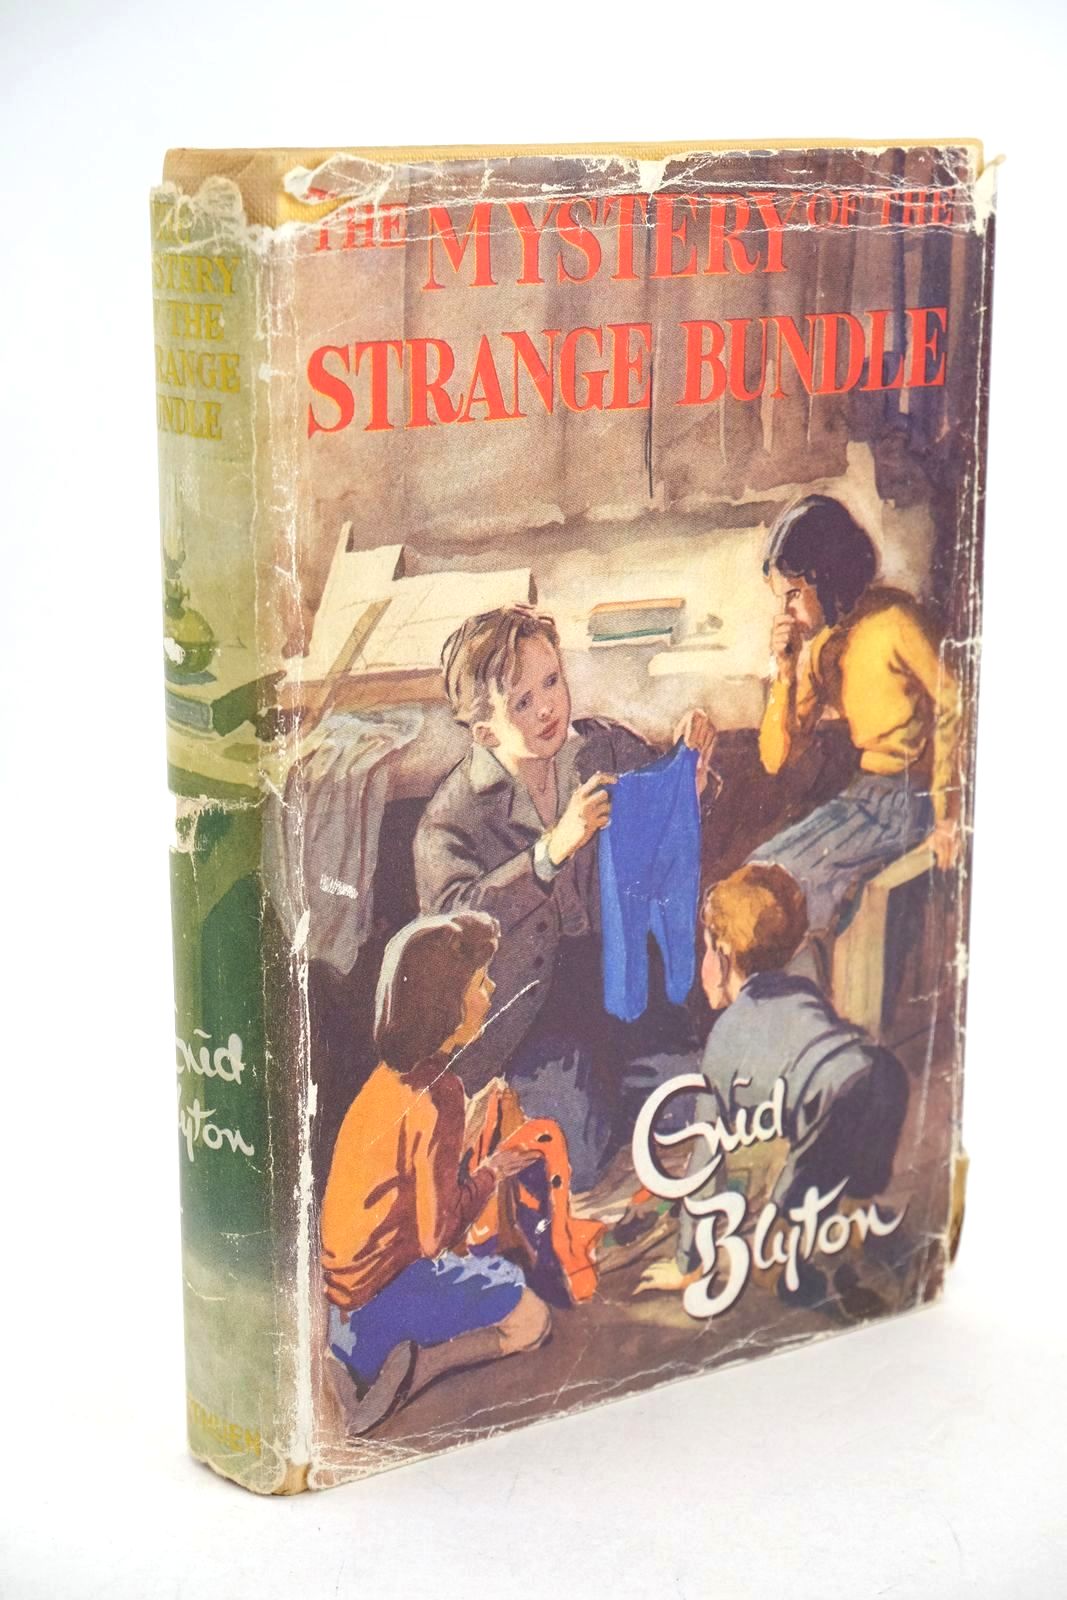 Photo of THE MYSTERY OF THE STRANGE BUNDLE written by Blyton, Enid illustrated by Evans, Treyer published by Methuen &amp; Co. Ltd. (STOCK CODE: 1326926)  for sale by Stella & Rose's Books